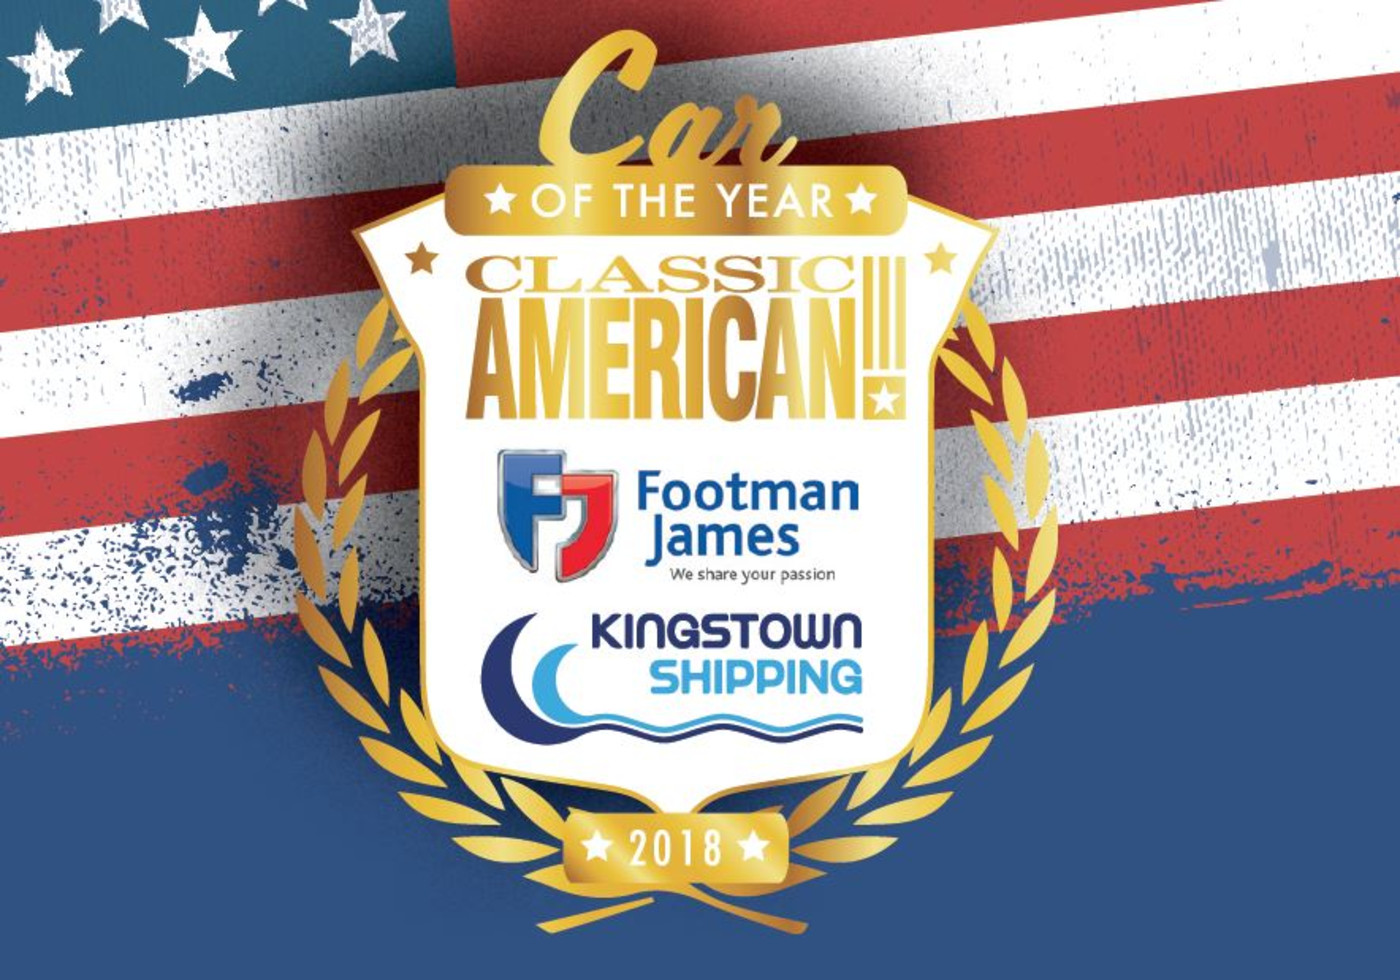 Classic American Magazine Car of the Year 2018   Kingstown Shipping.JPG